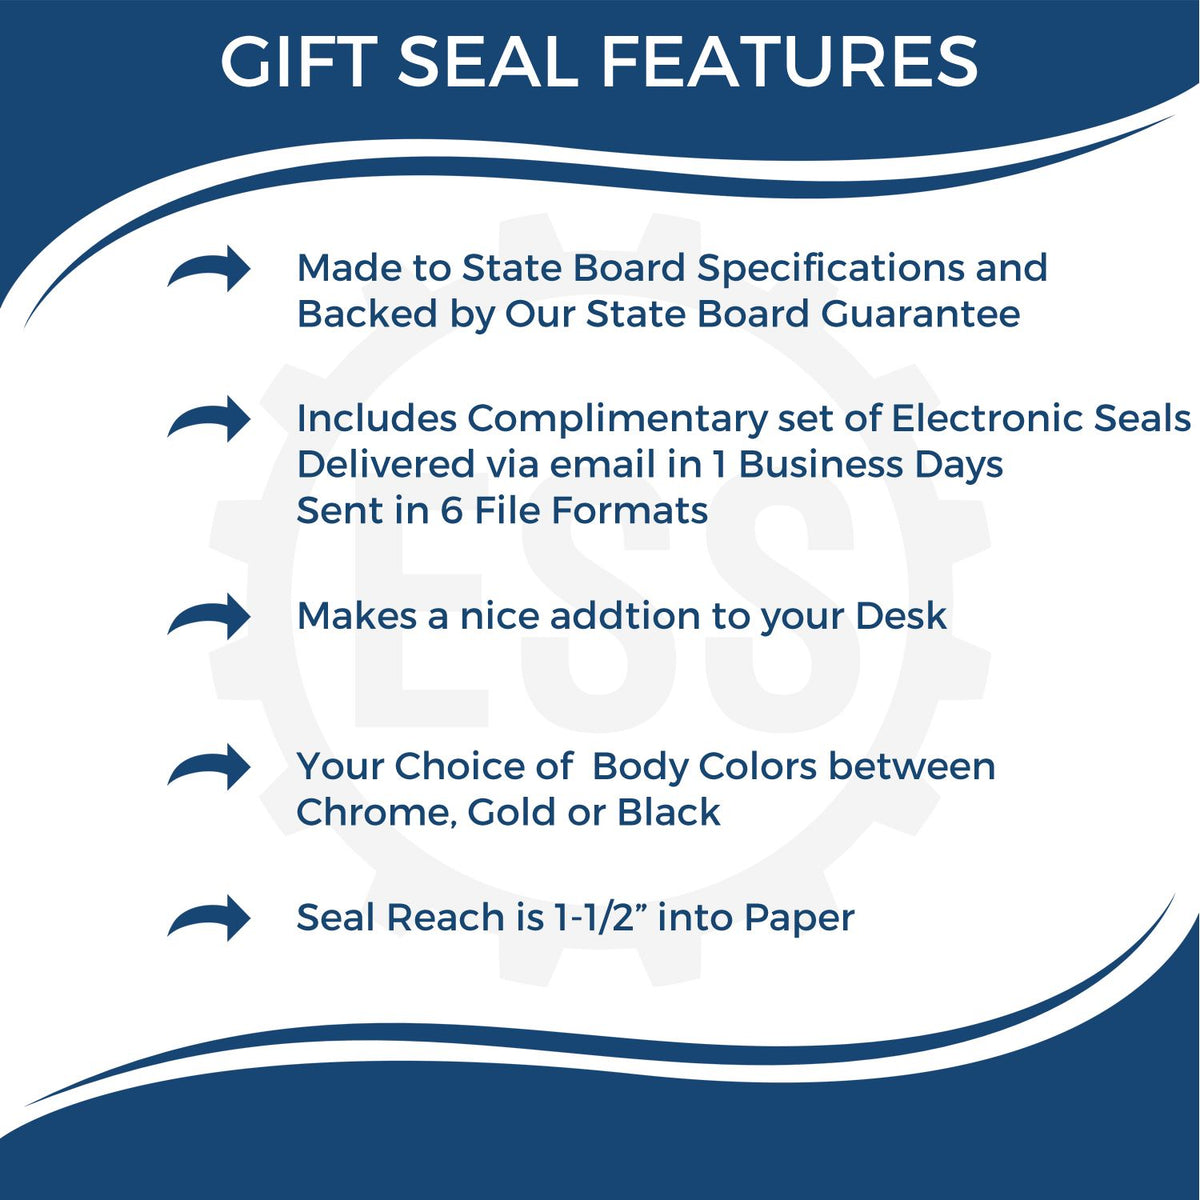 A picture of an infographic highlighting the selling points for the Gift Idaho Land Surveyor Seal